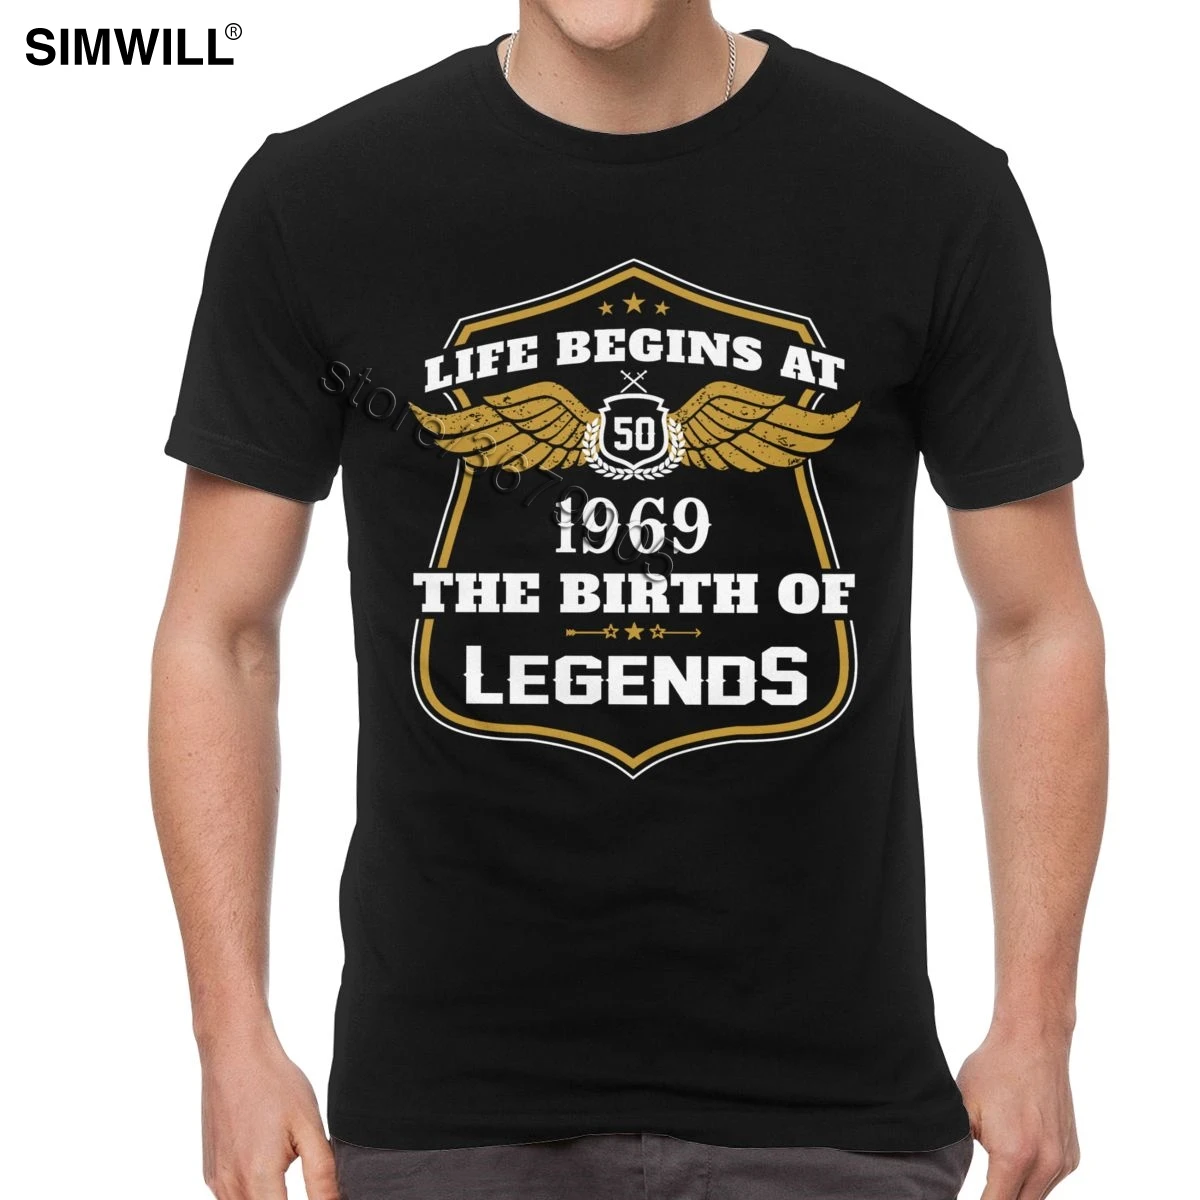 

Life Begins At 50 Yeas Old T Shirts Men Cotton The Birth Of Legends Are Born in 1969 T-Shirt 50th Birthday Gift Tees Casual Tops